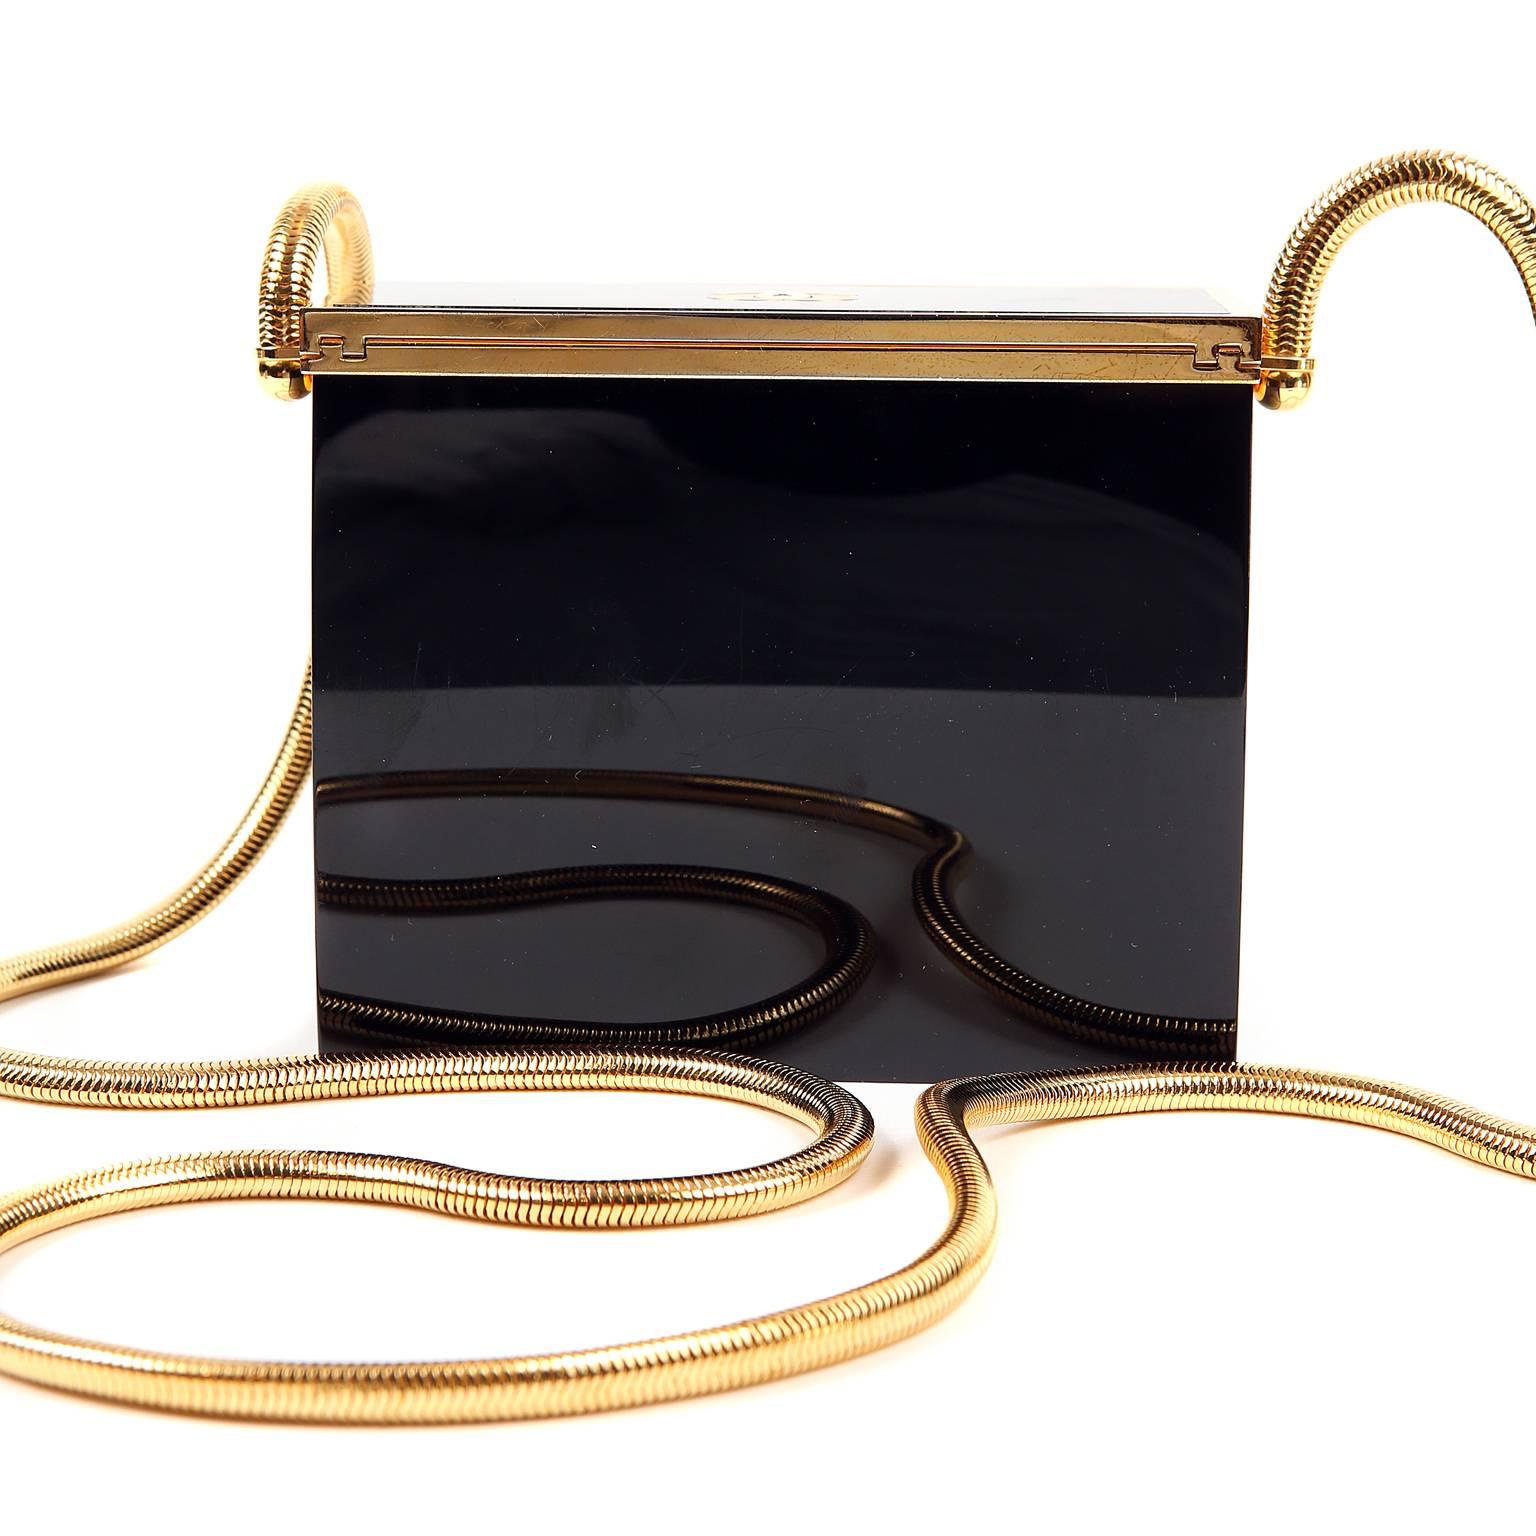 Chanel Black Resin Evening Bag- Near Pristine
  A rare piece that is a must have for any collector. 

Polished black resin rectangular structured bag is edged with gold hardware.  Hinged top.  Long gold snake chain strap is comfortably carried on